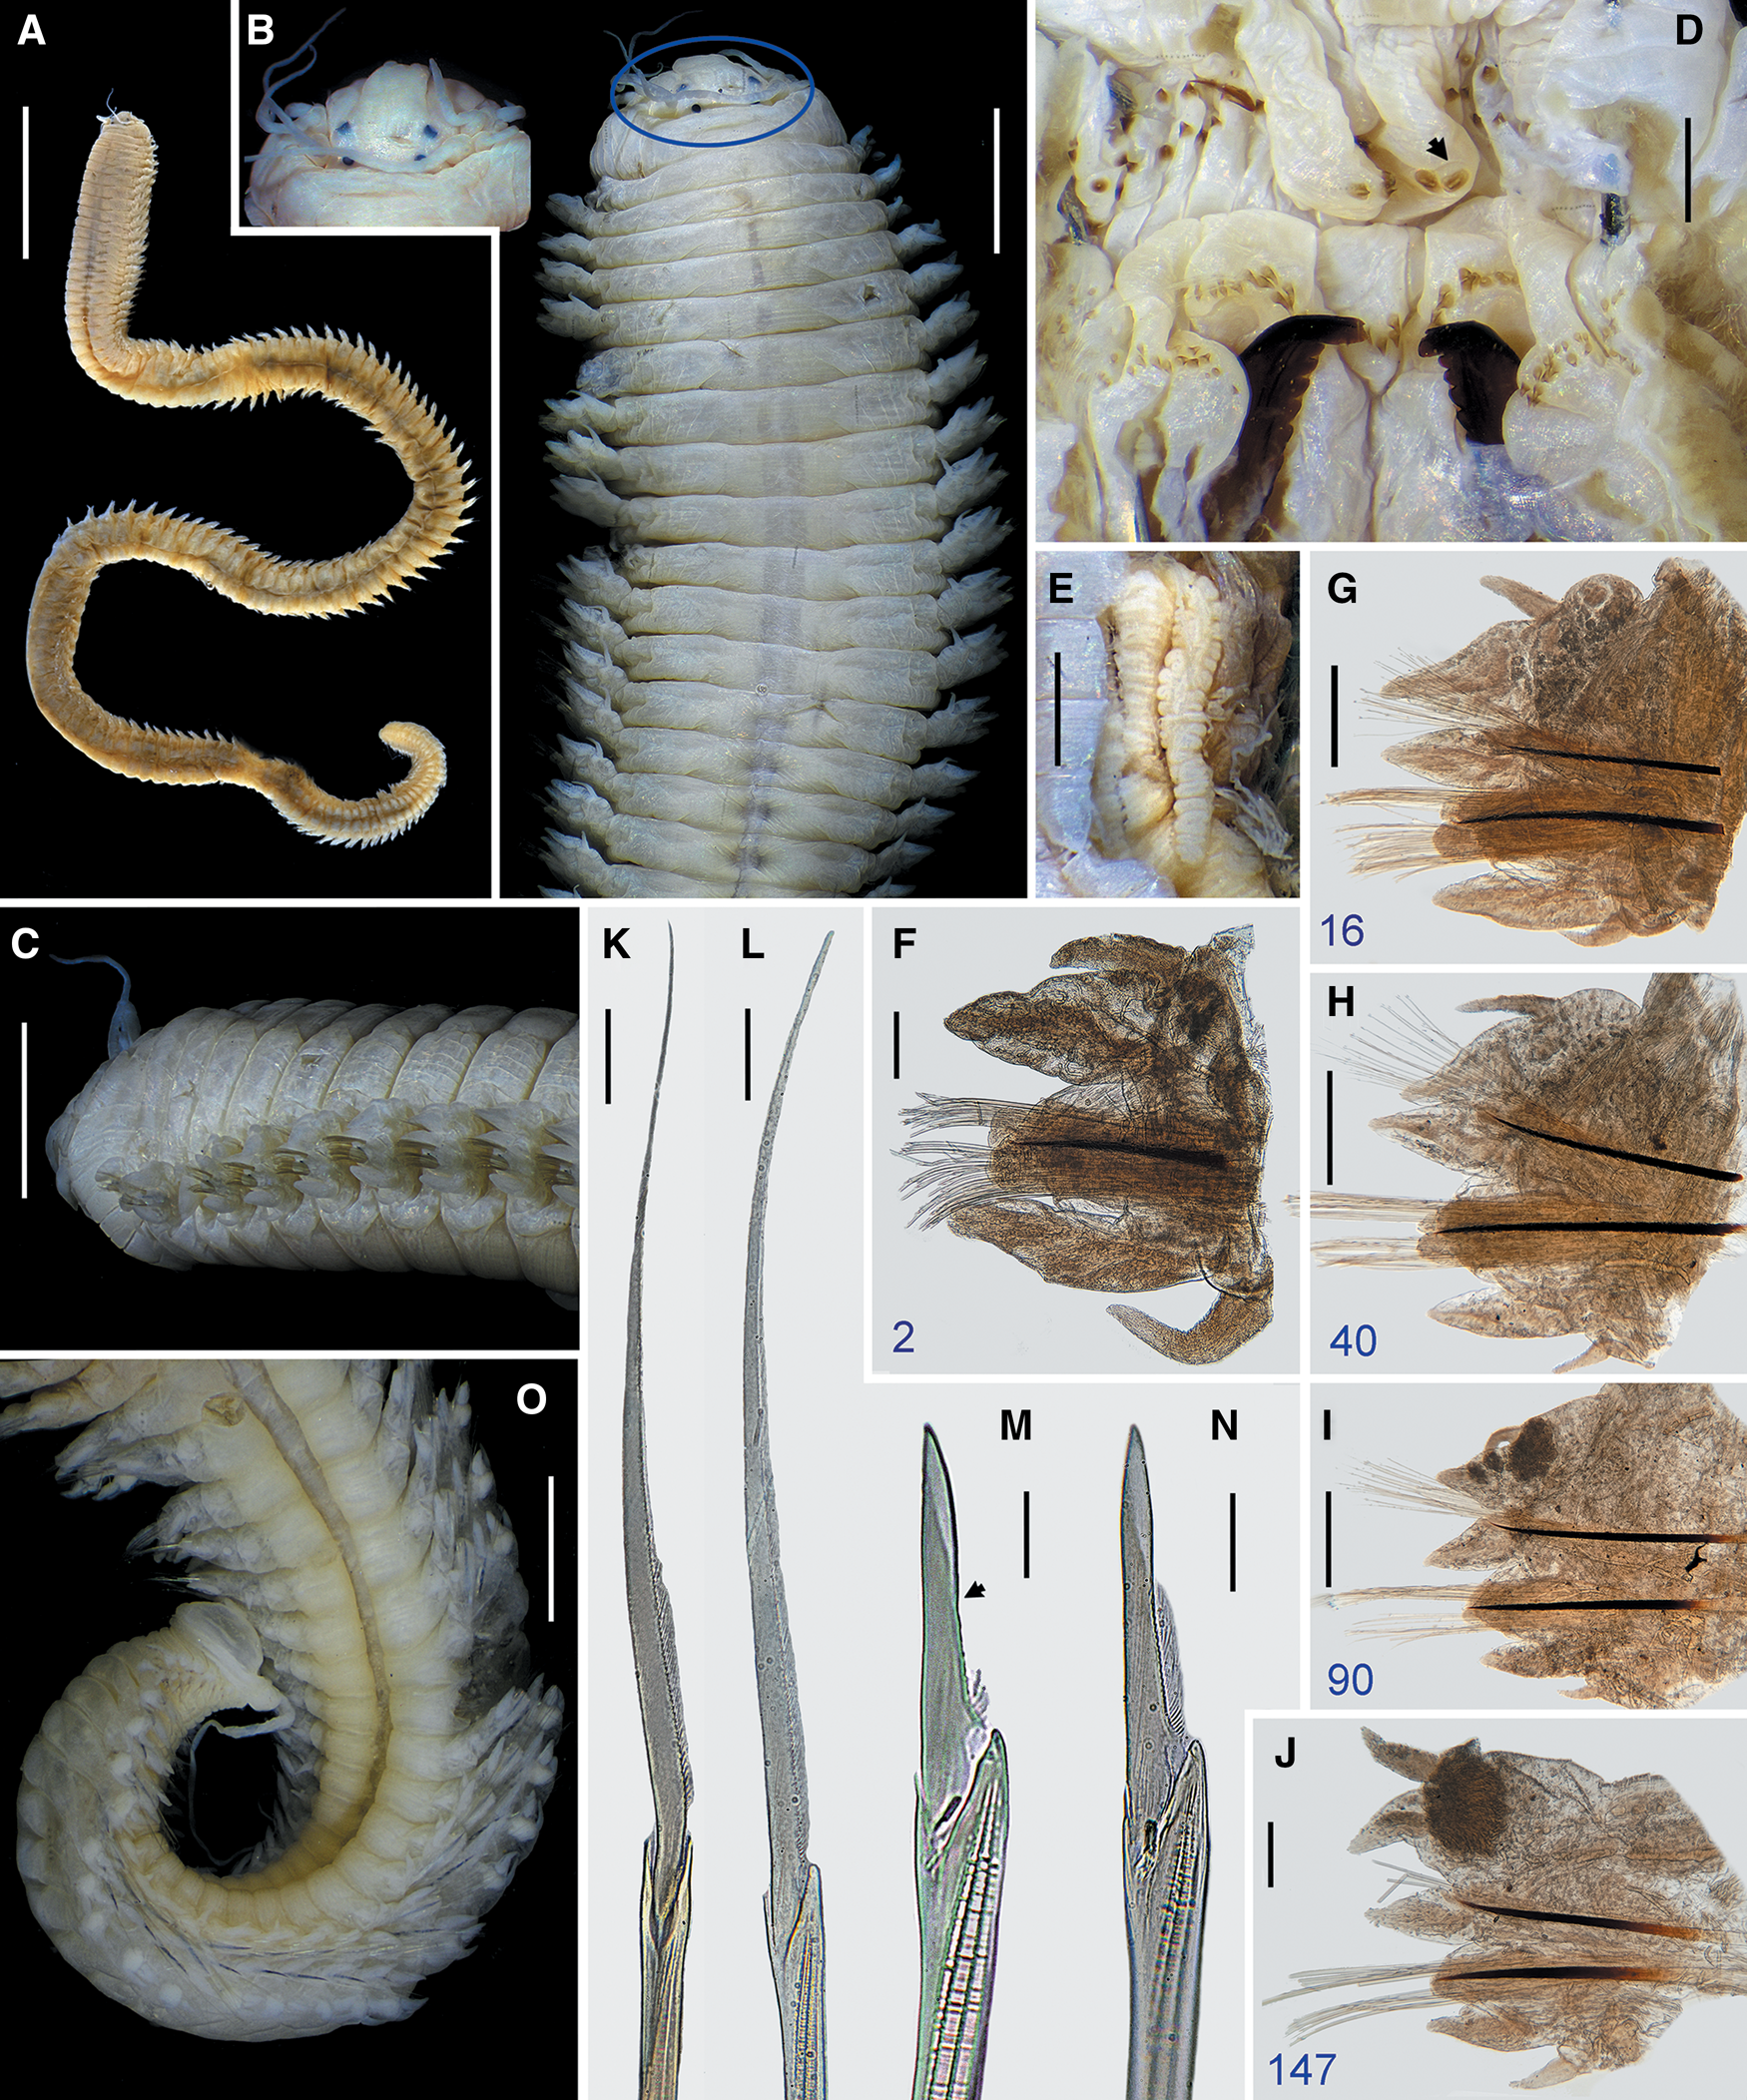 Sand Worm (Perinereis sp.) is the same species as sea worms